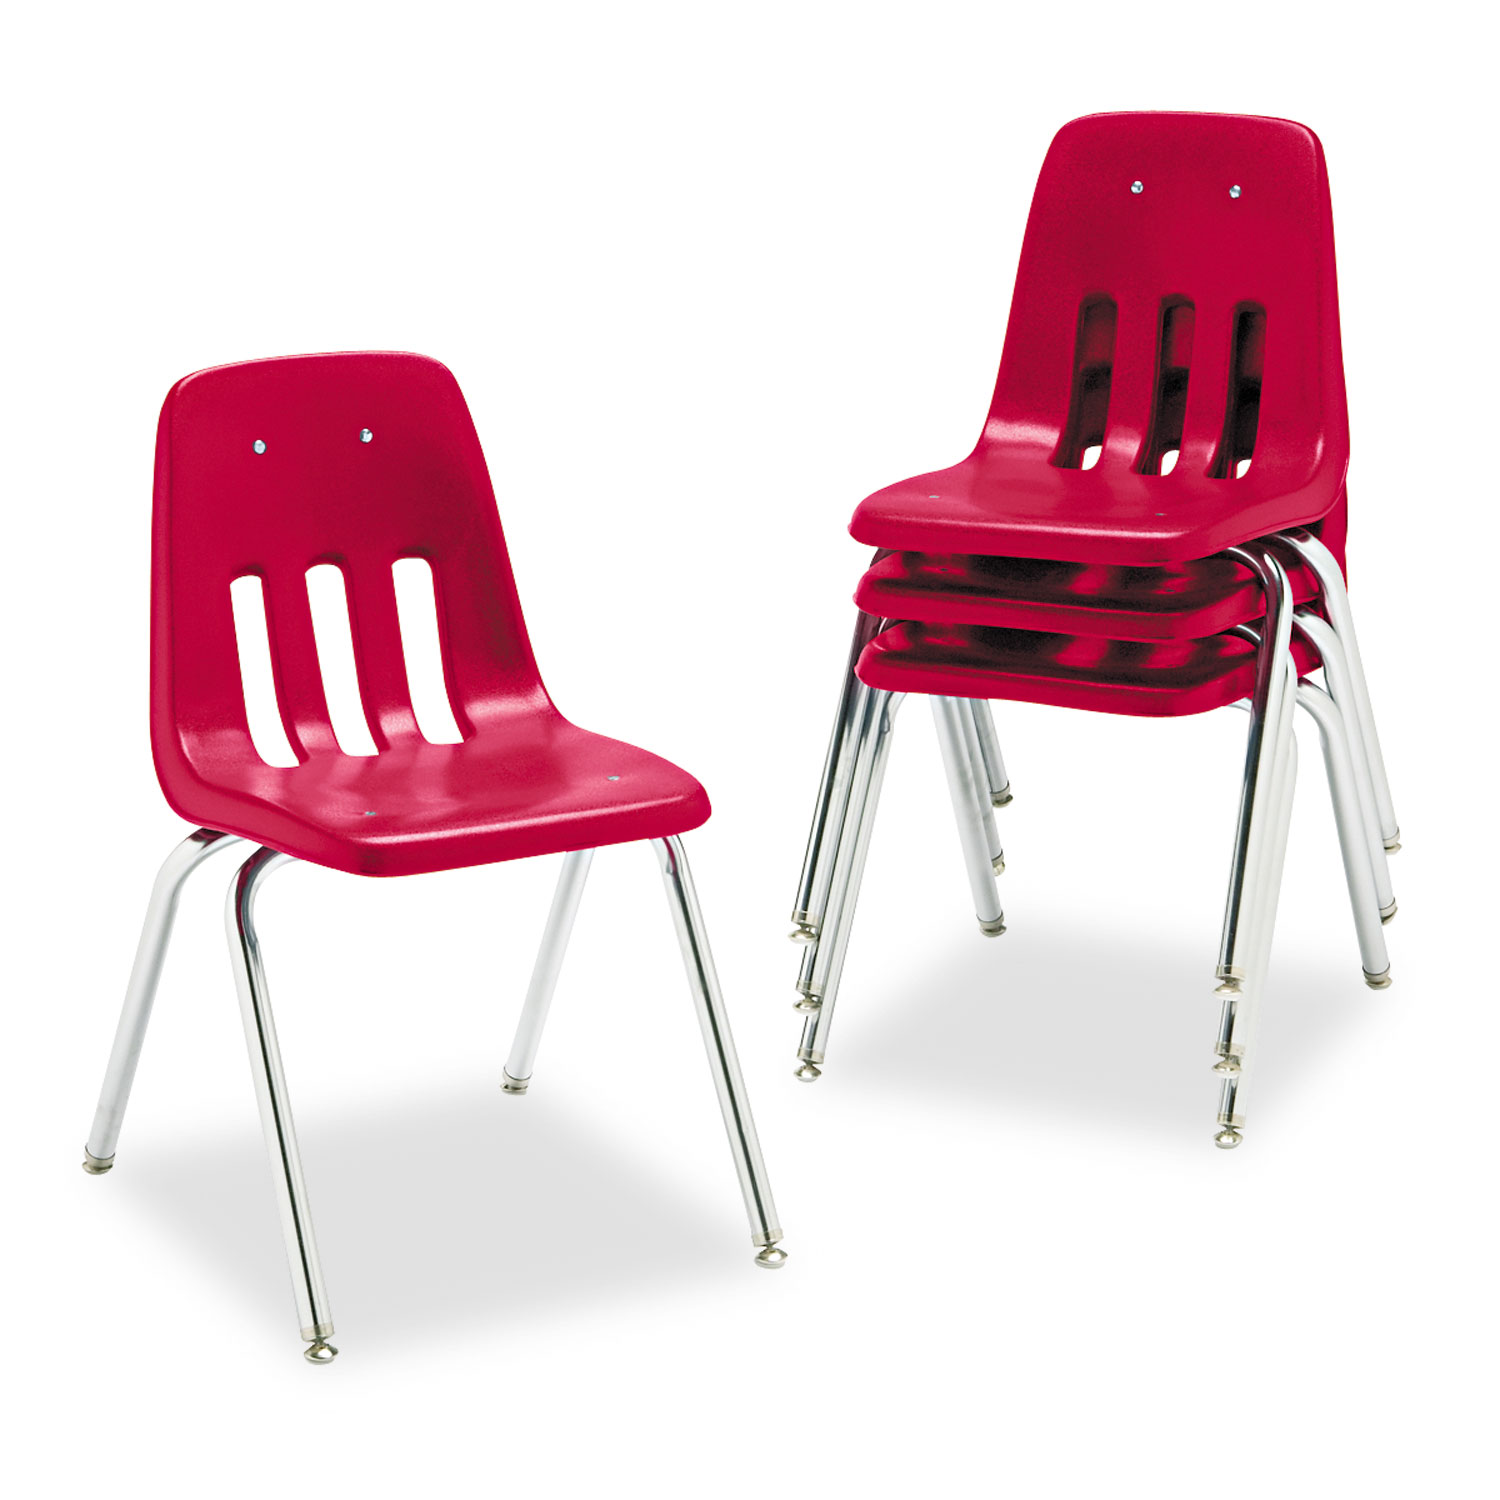 9000 Series Classroom Chair, 18 Seat Height, Red/Chrome, 4/Carton